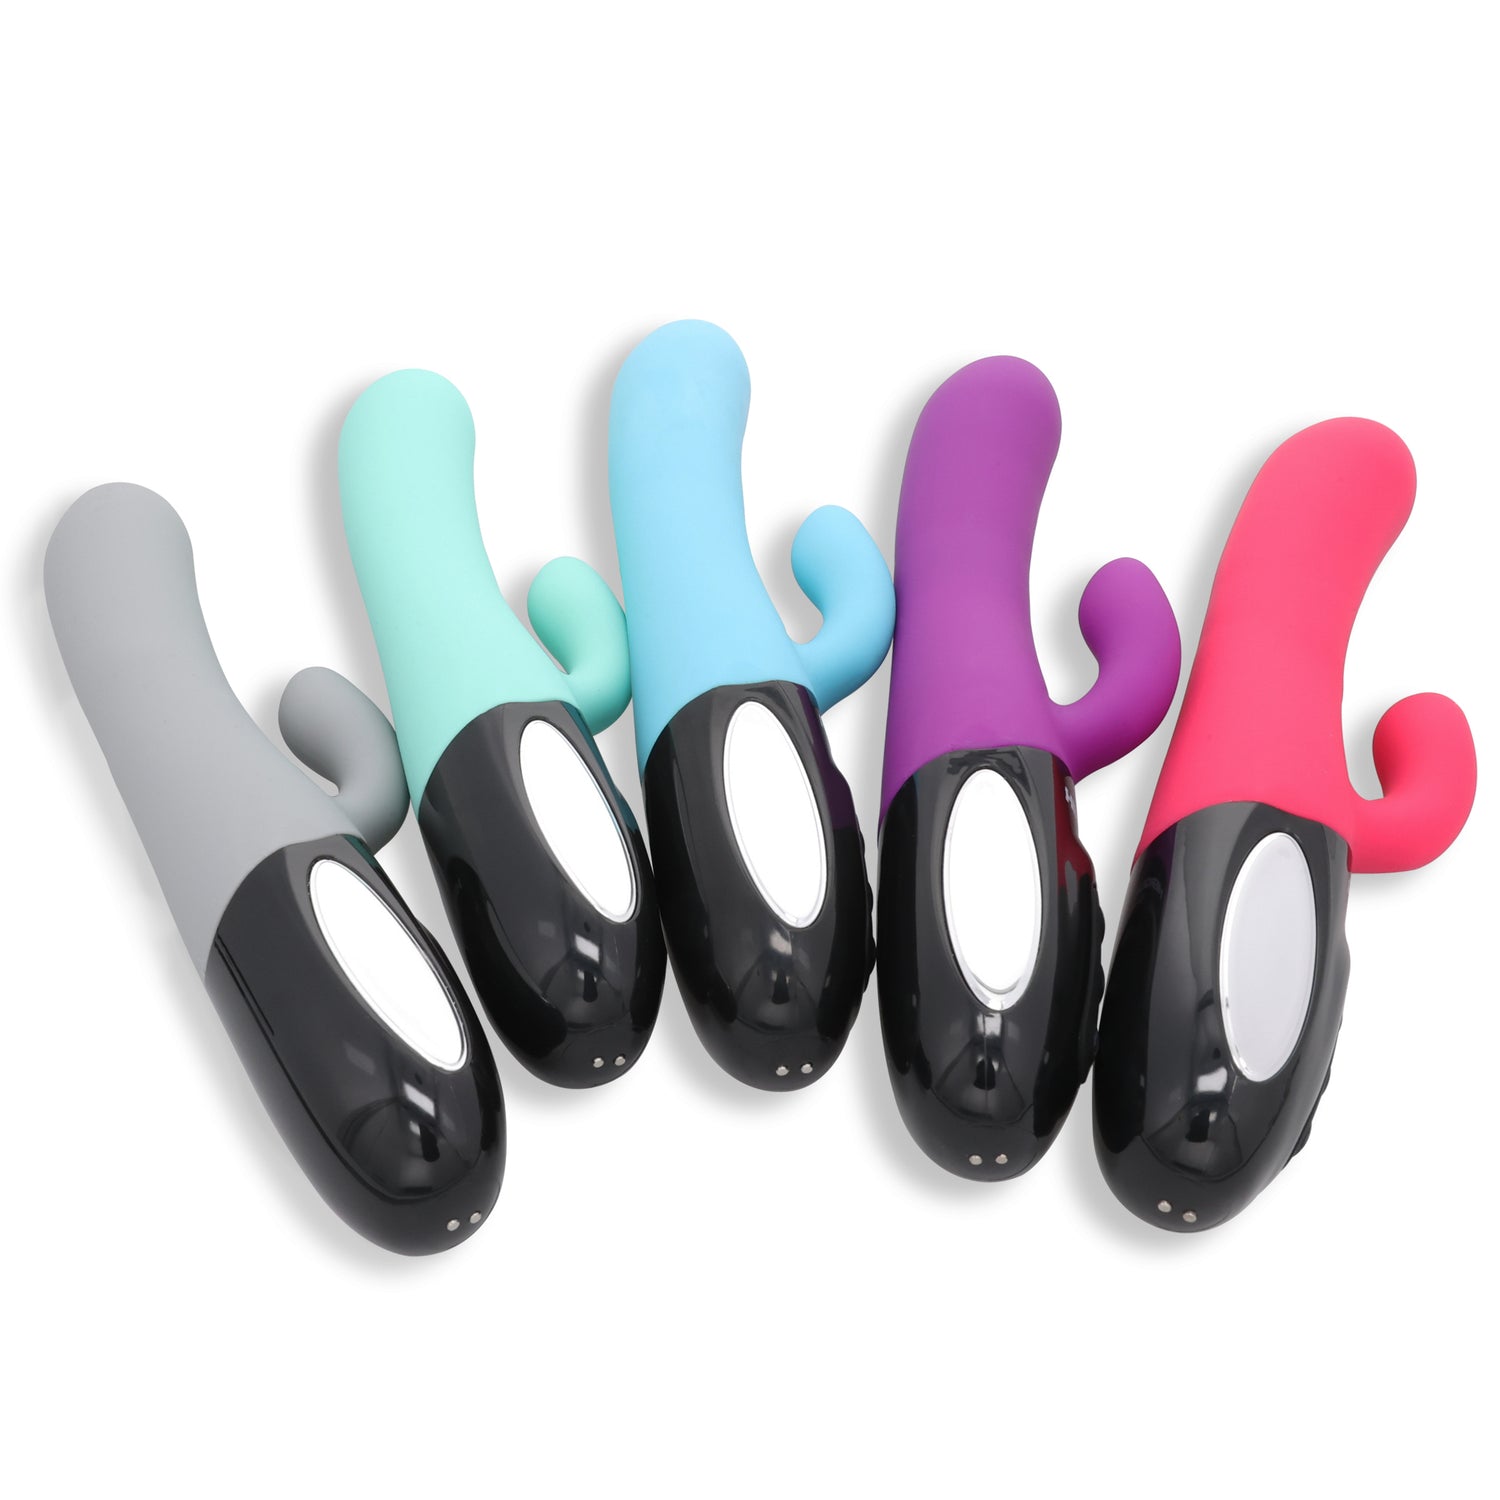 Use Your Discount on Any of These Great Sex Toys